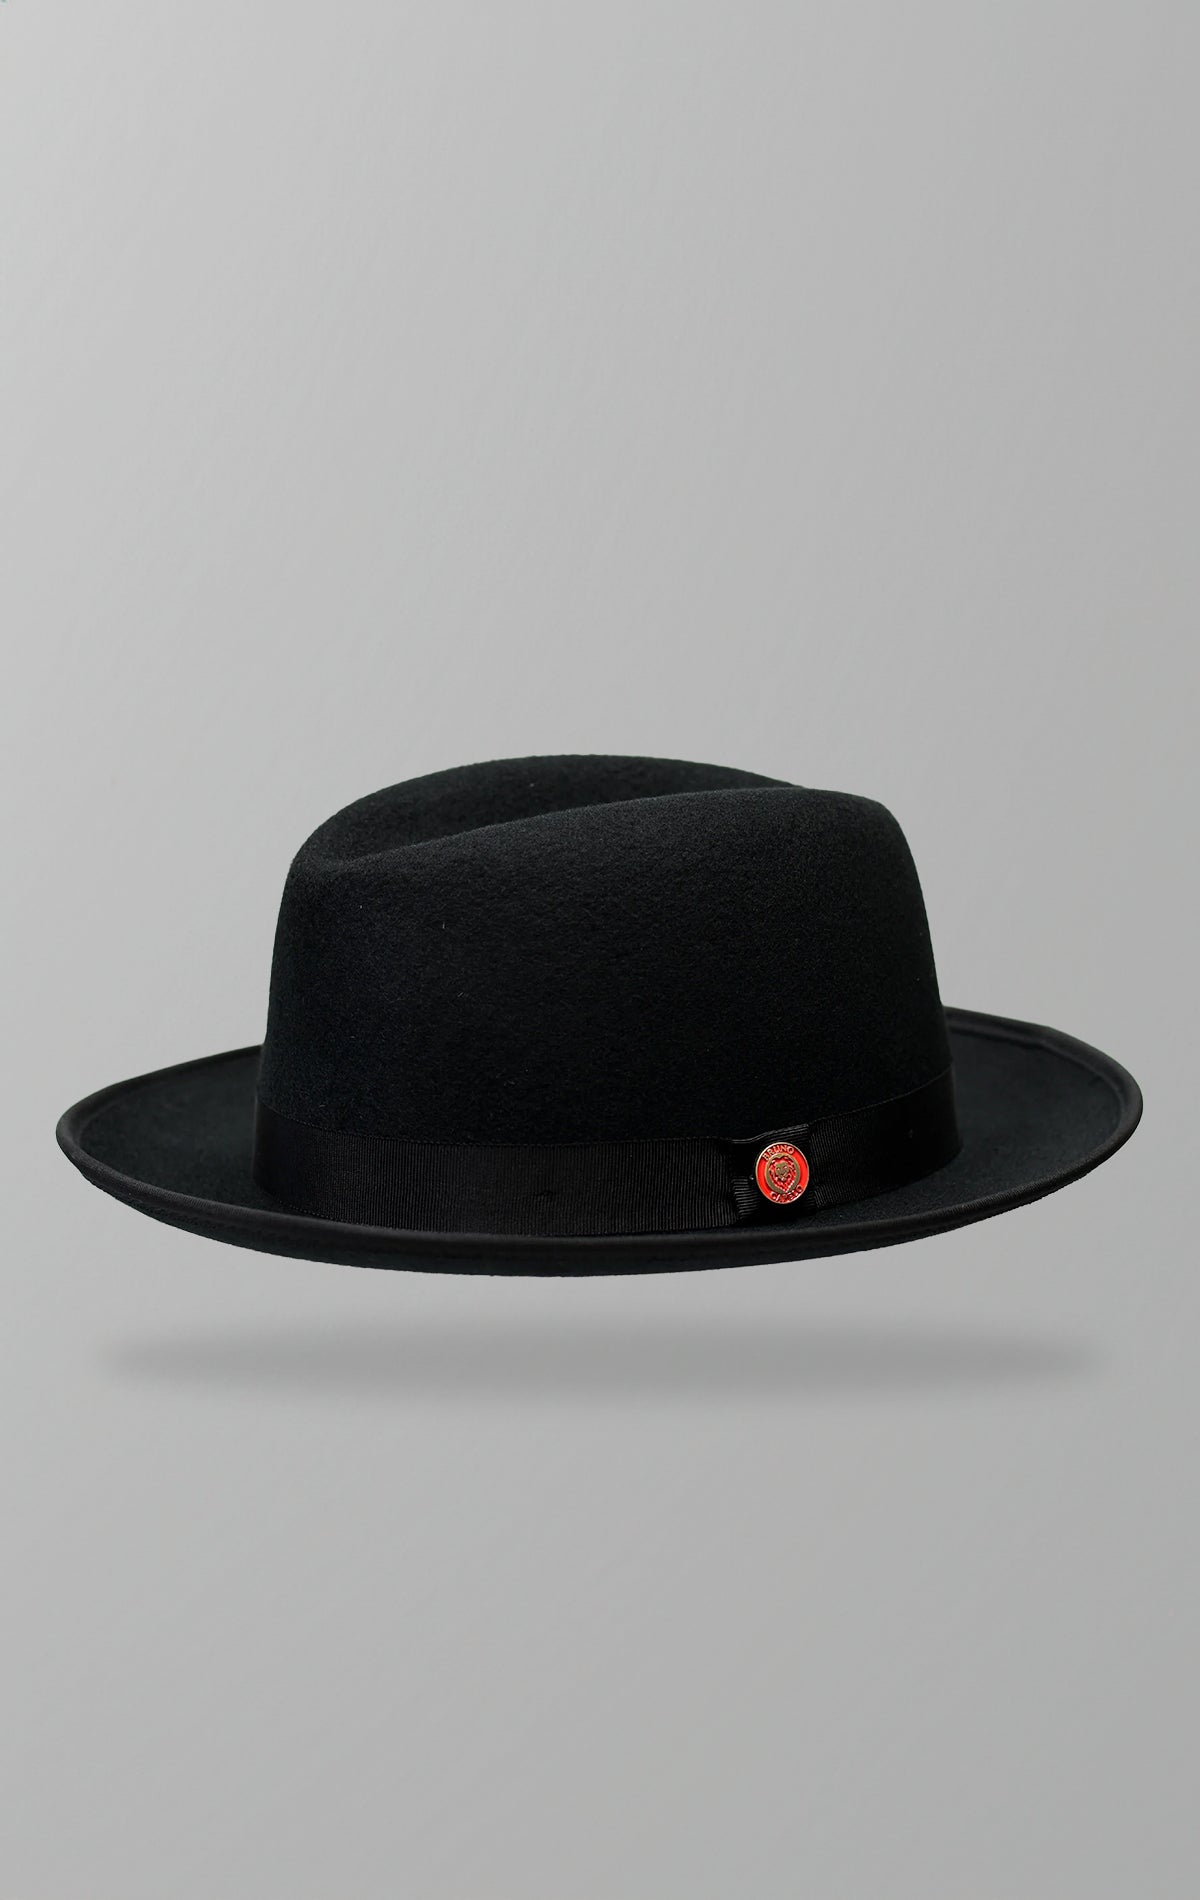 Classic wool fedora from The King Collection with a 2.25-inch snap brim and a self-matching grosgrain hat band.